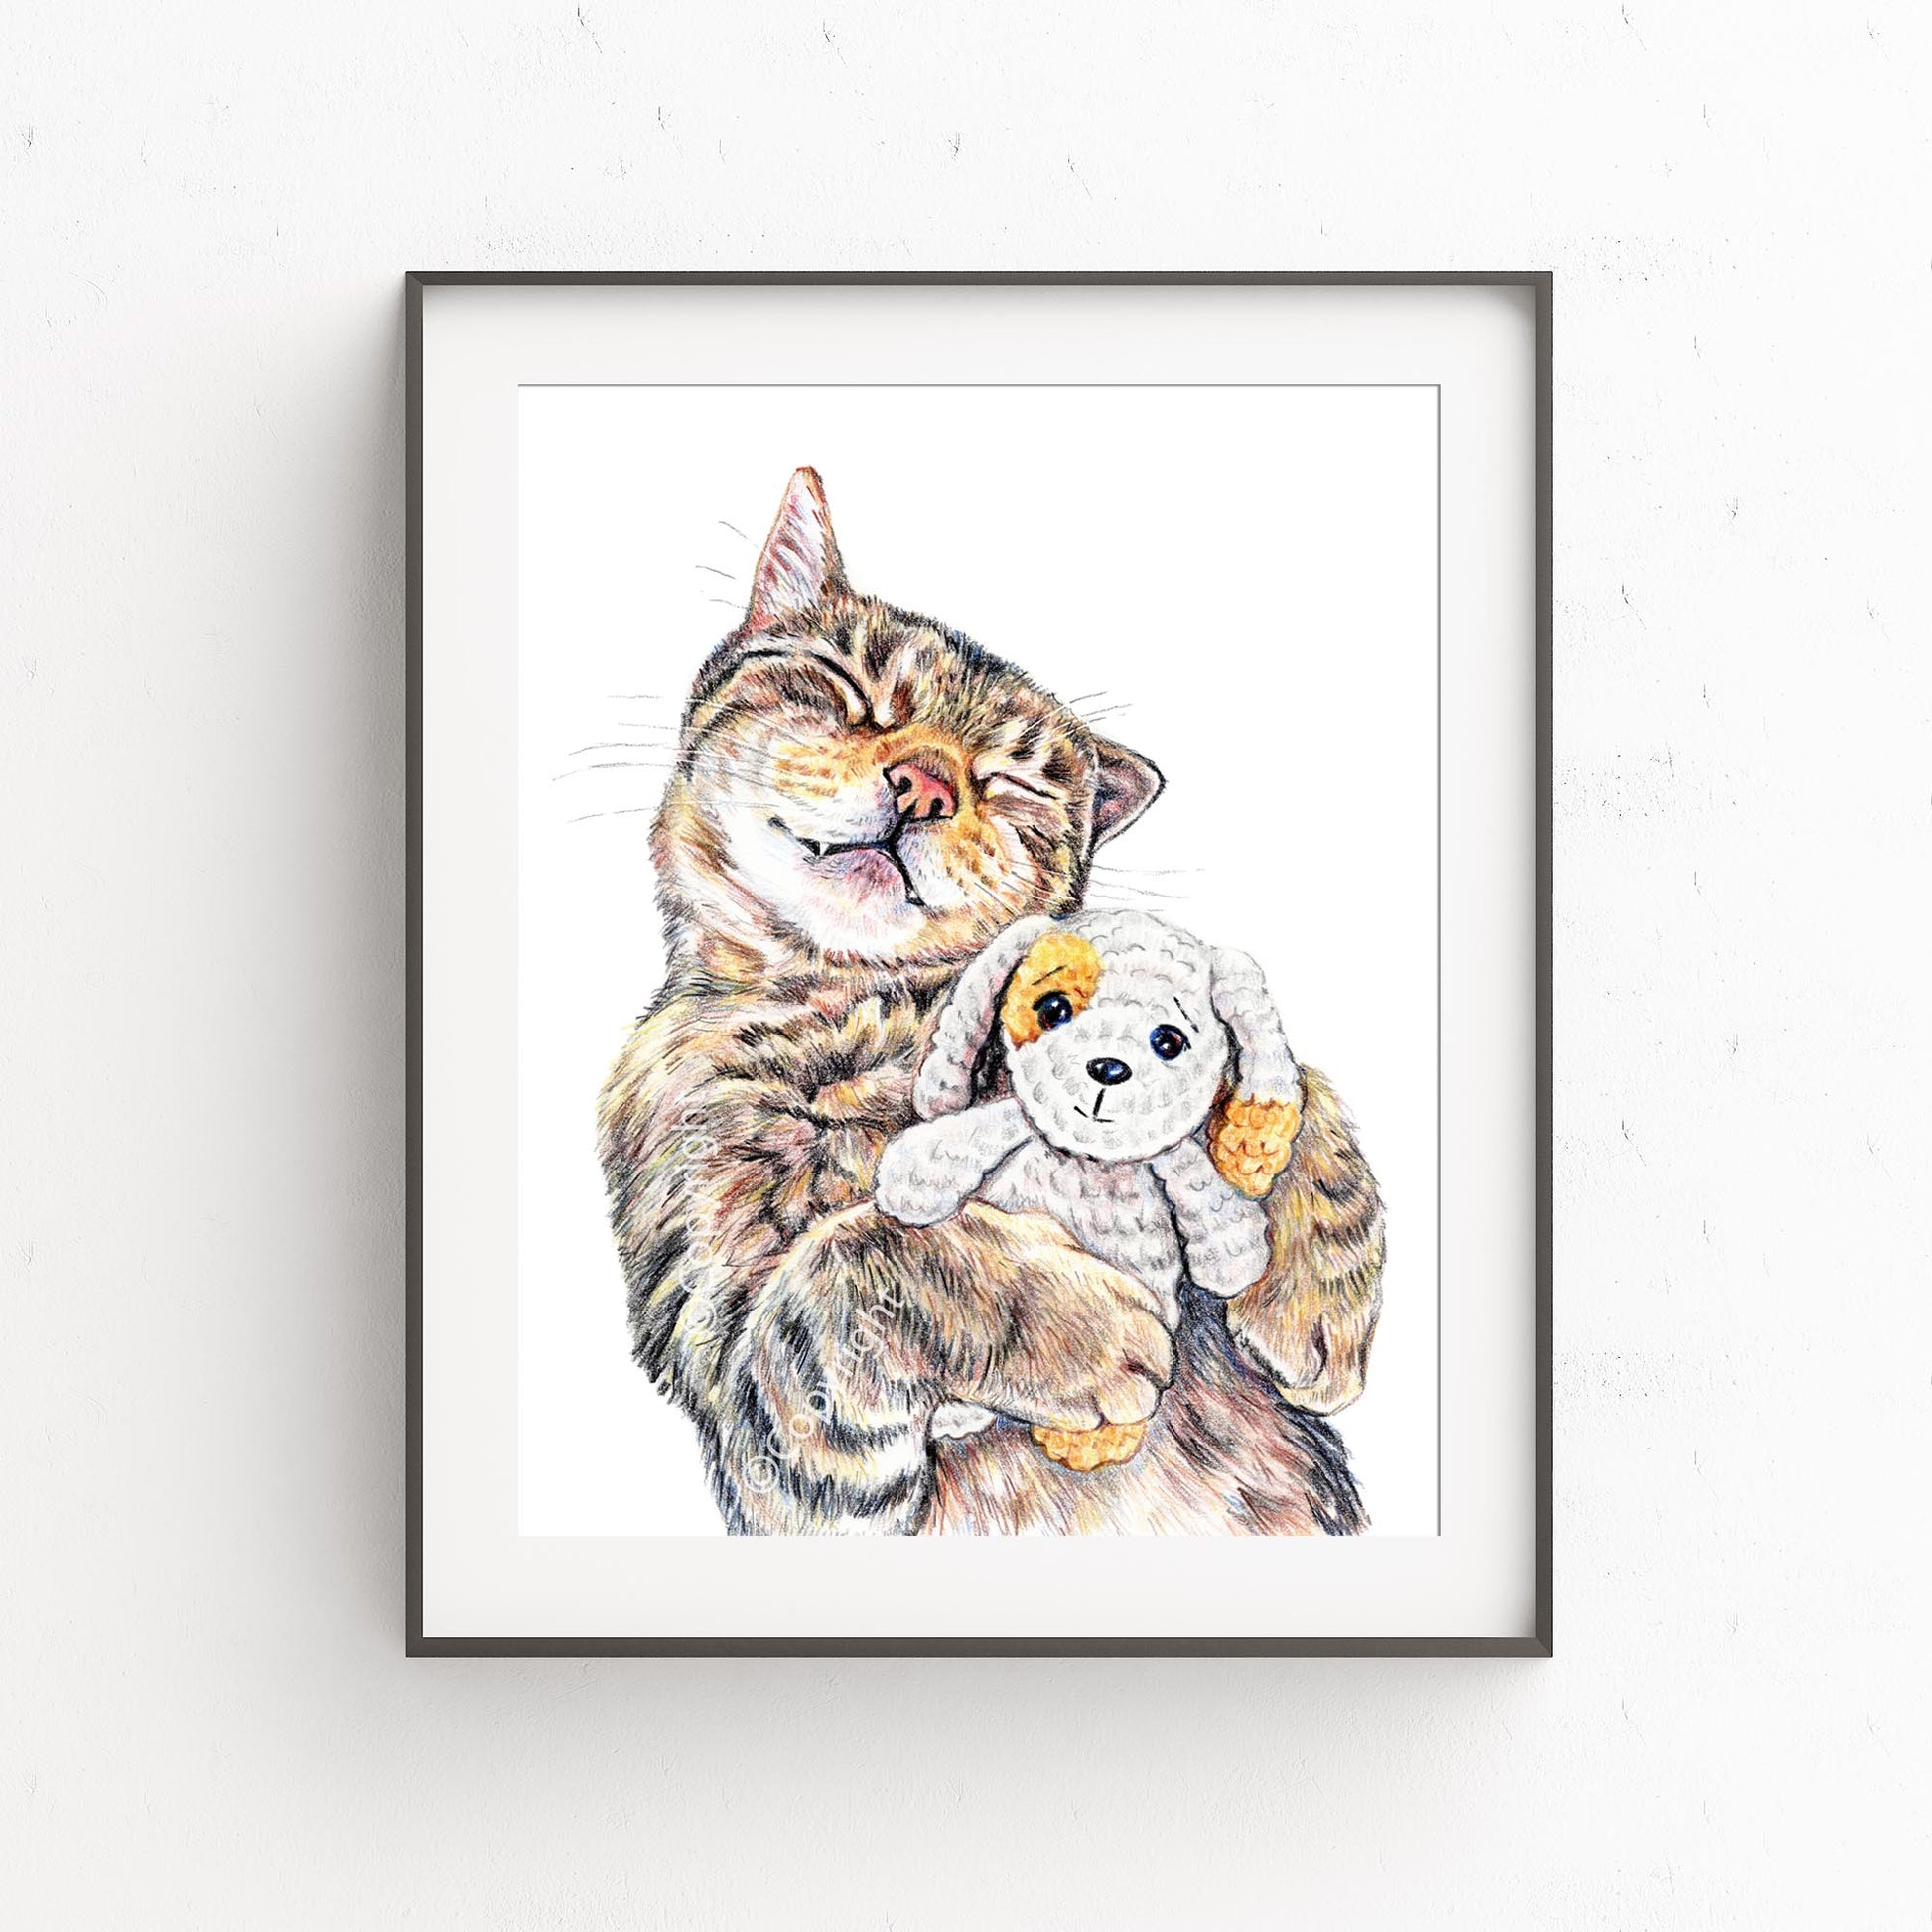 Coloured pencil drawing of a brown tabby cat napping with stuffed dog by Deidre Wicks